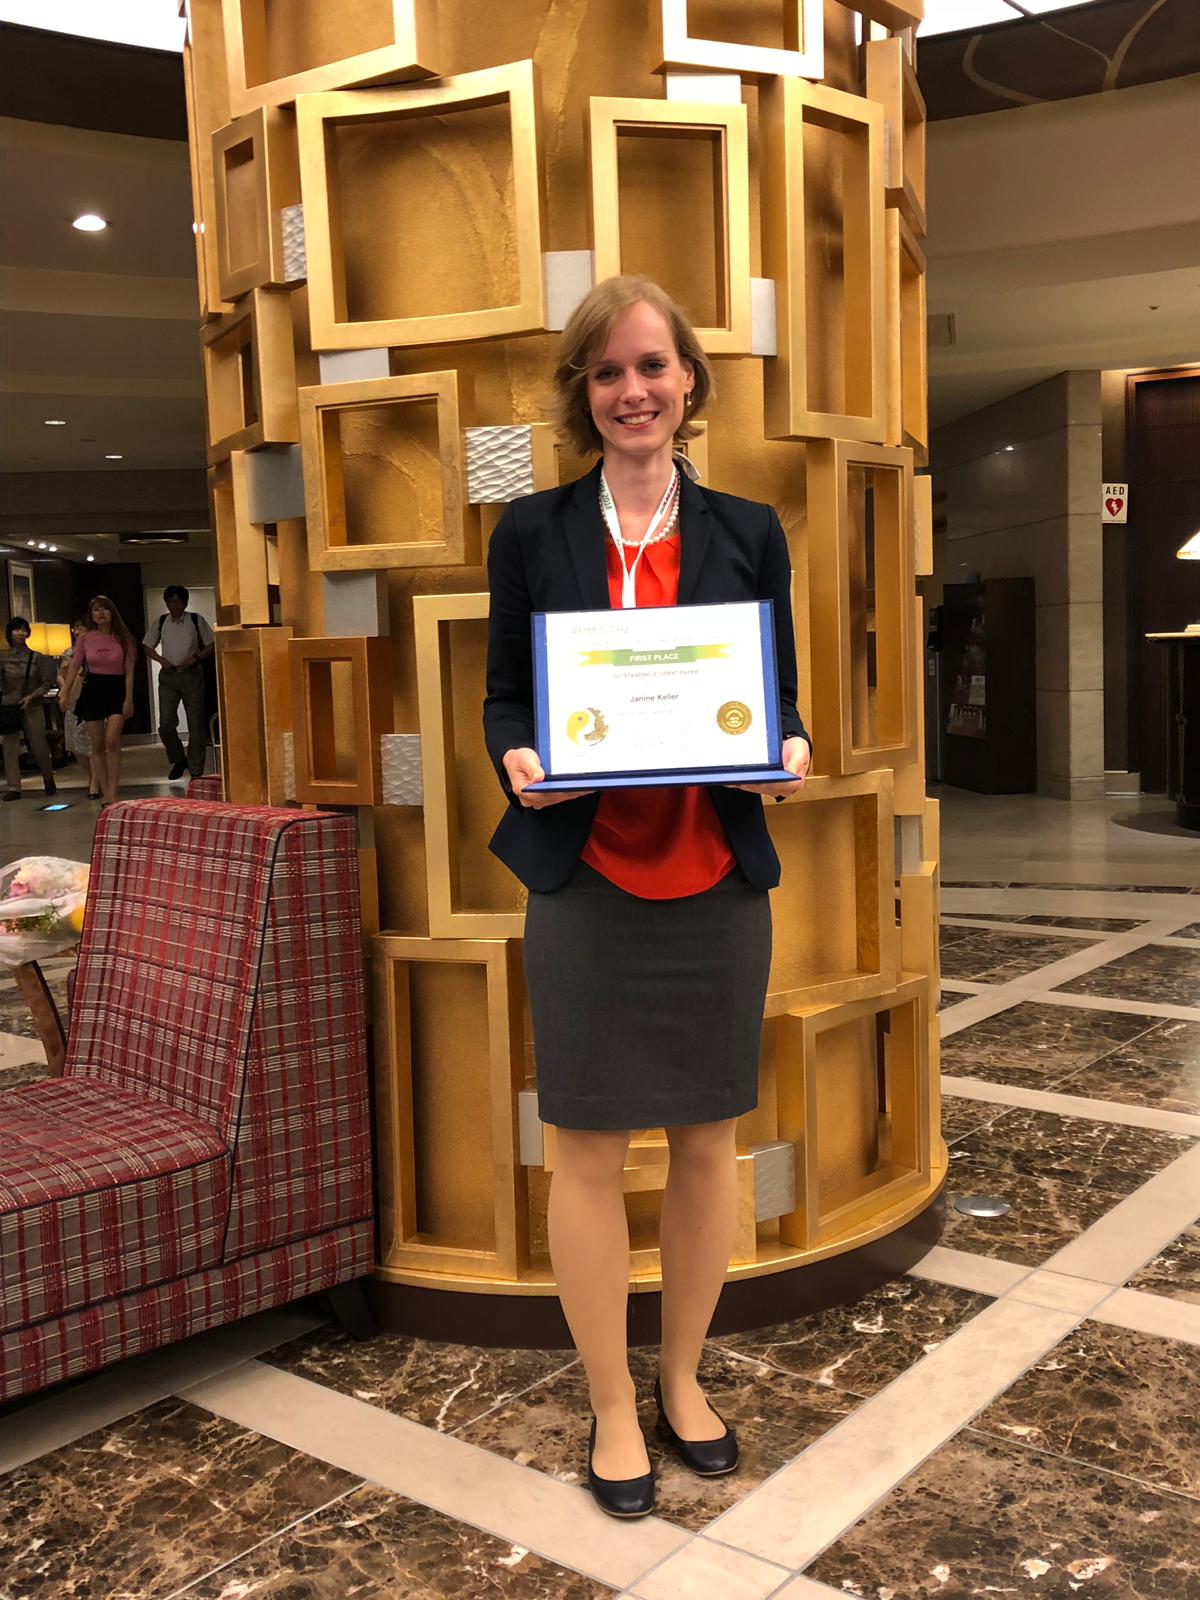 Enlarged view: Janine Keller won the outstanding student paper award at IRMMW-THz 2018